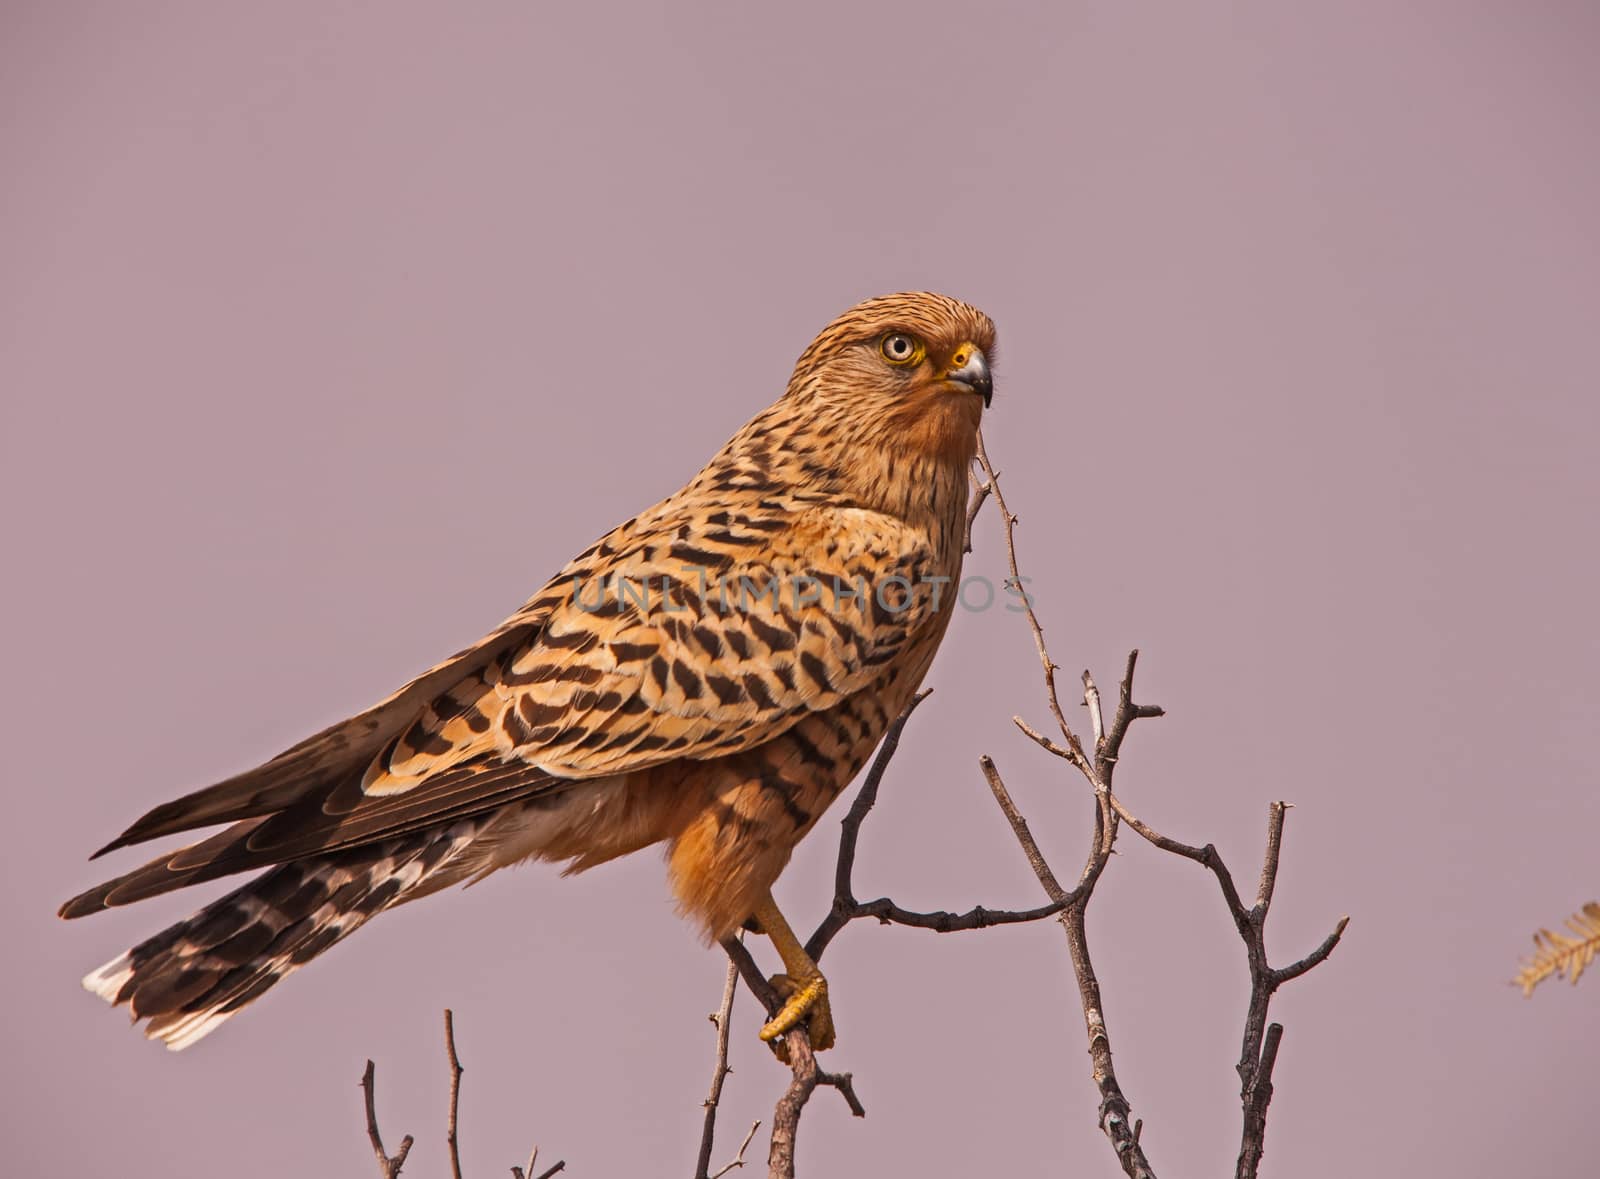 The Greater Kestrel, Falco rupicoloides, photographed in the Kgalagadi Trans Frontier Park, South Africa